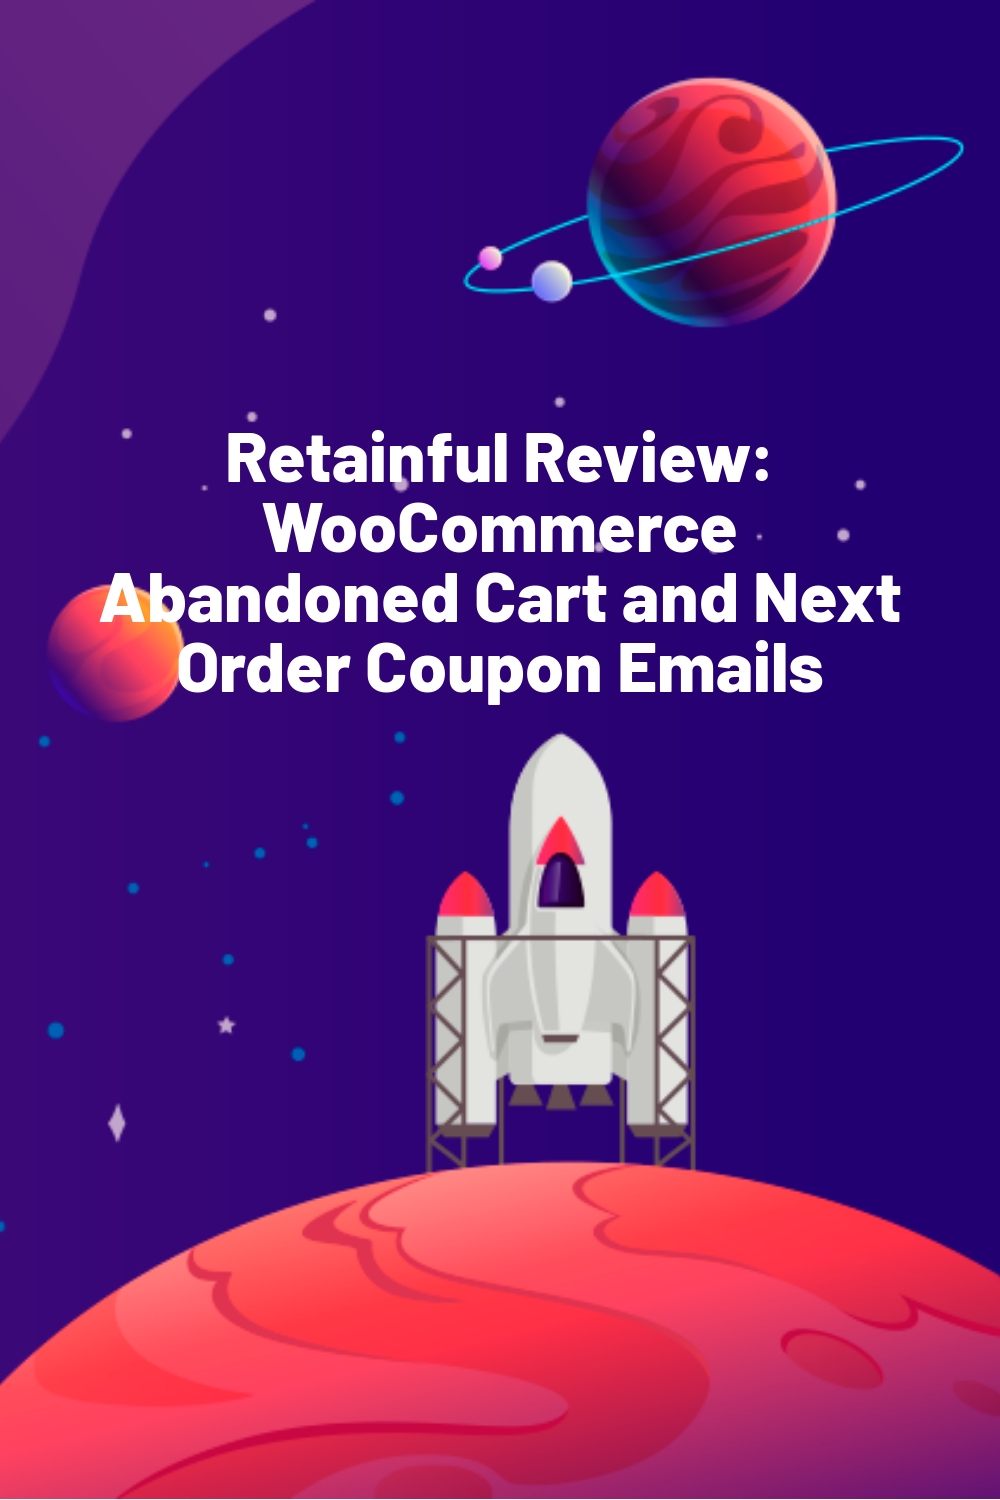 Retainful Review: WooCommerce Abandoned Cart and Next Order Coupon Emails